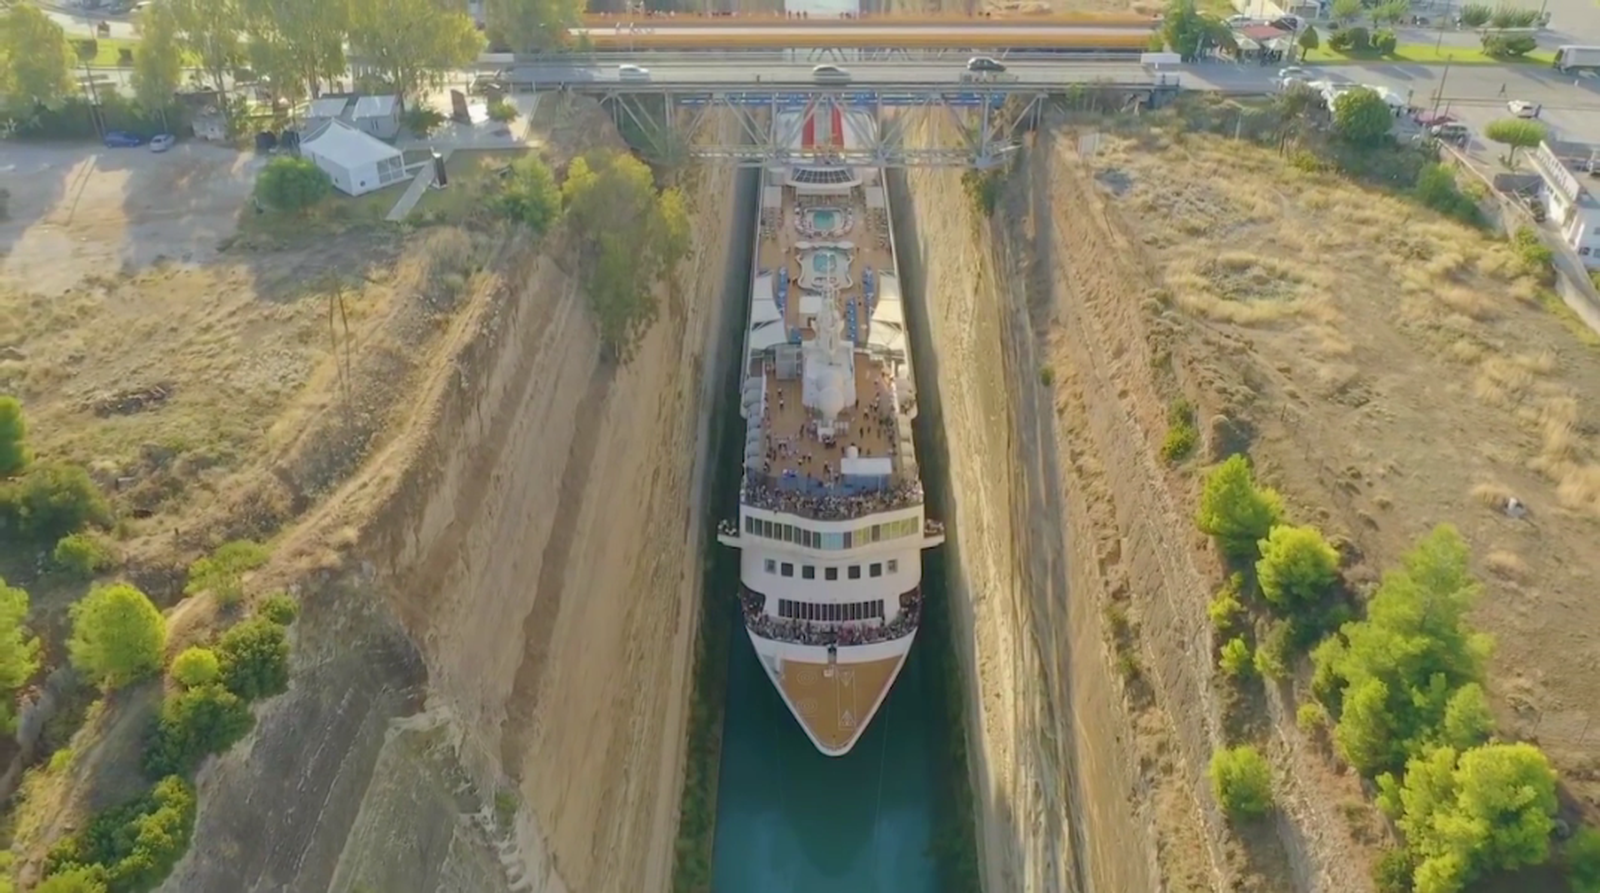 Fred Olsen's Braemar passing through the Corinth Canal